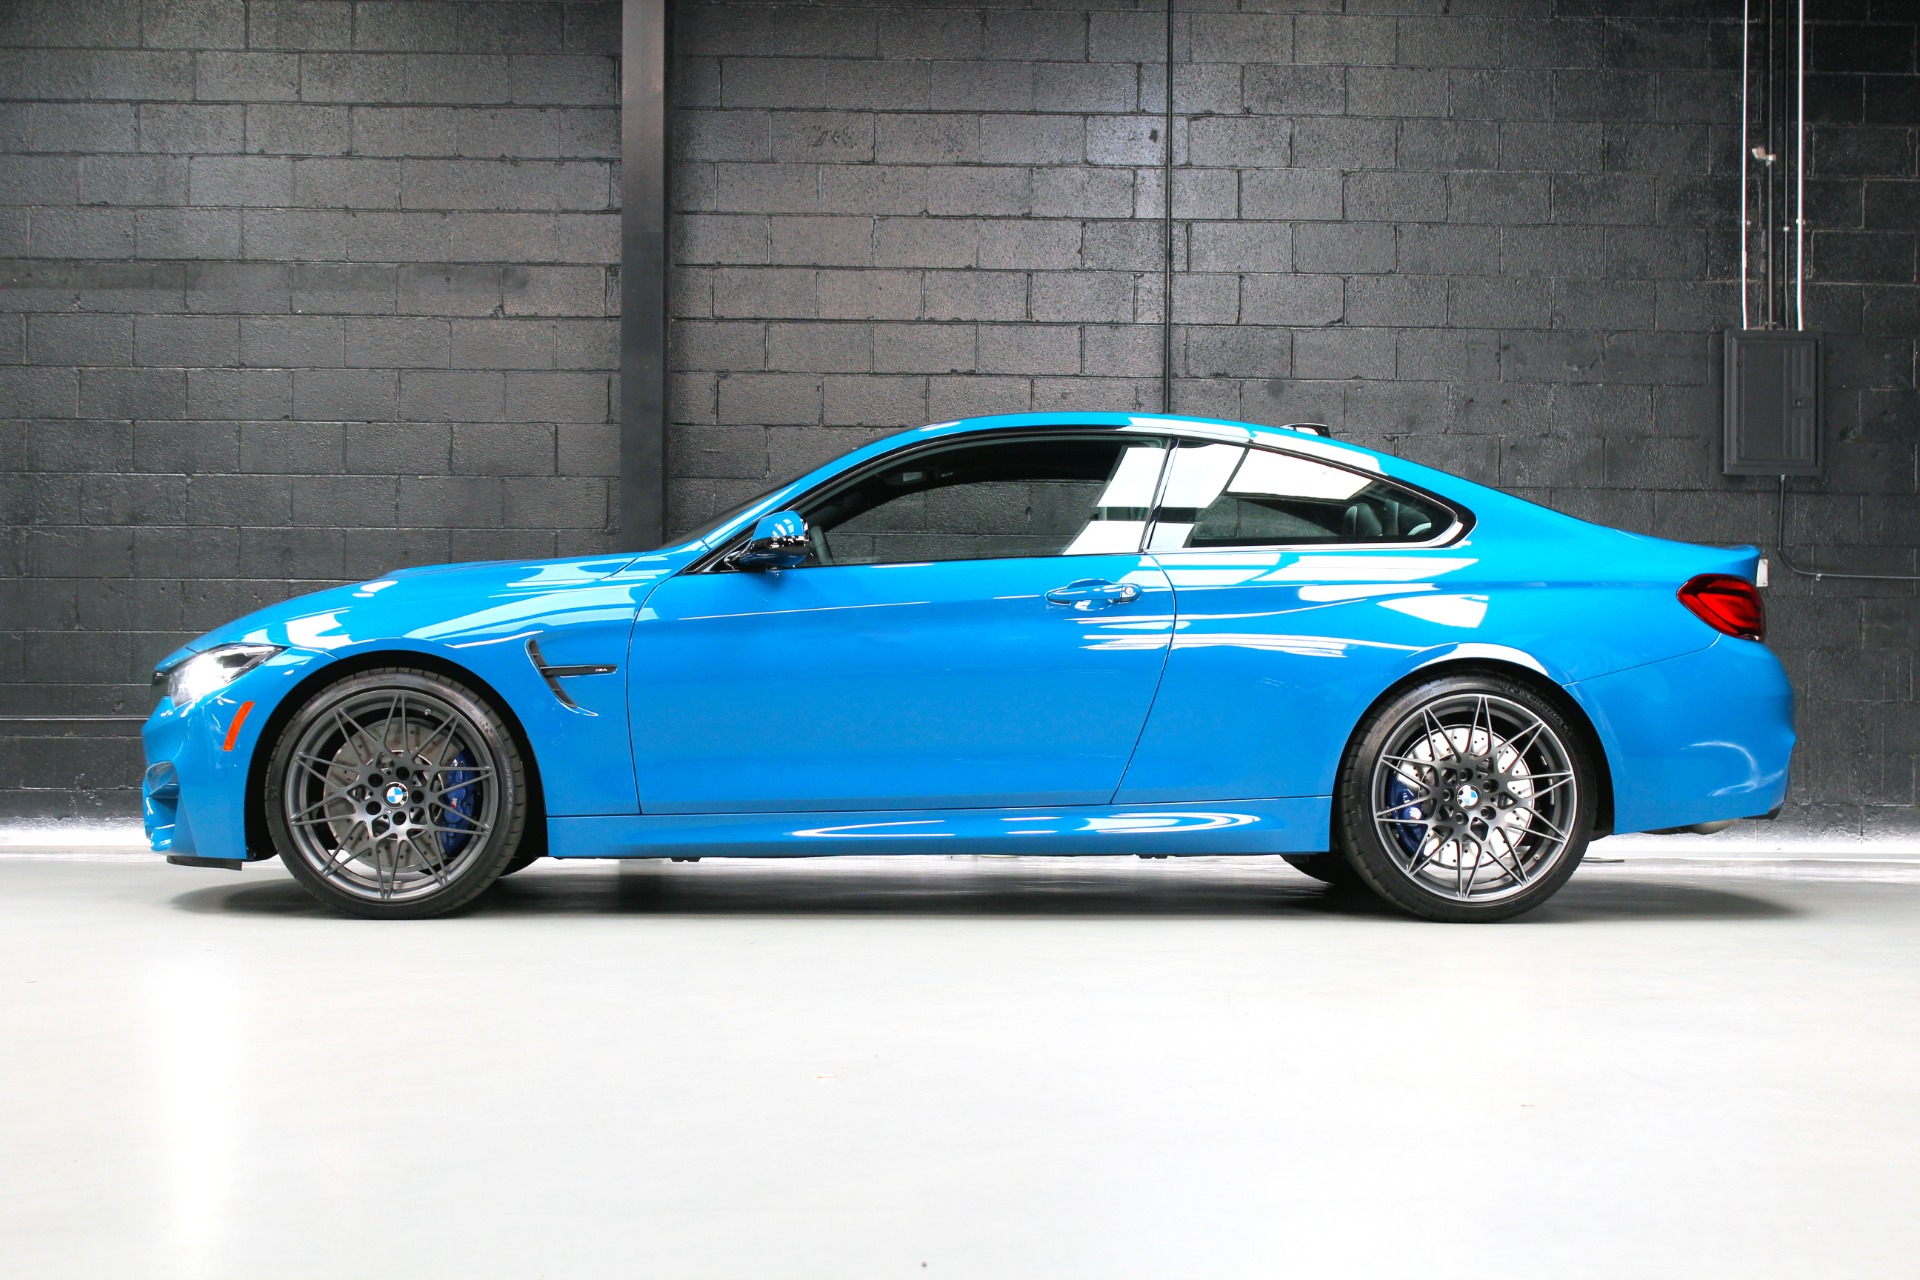 BMW 2020 M4 Edition ///M Heritage Coupe Reveal